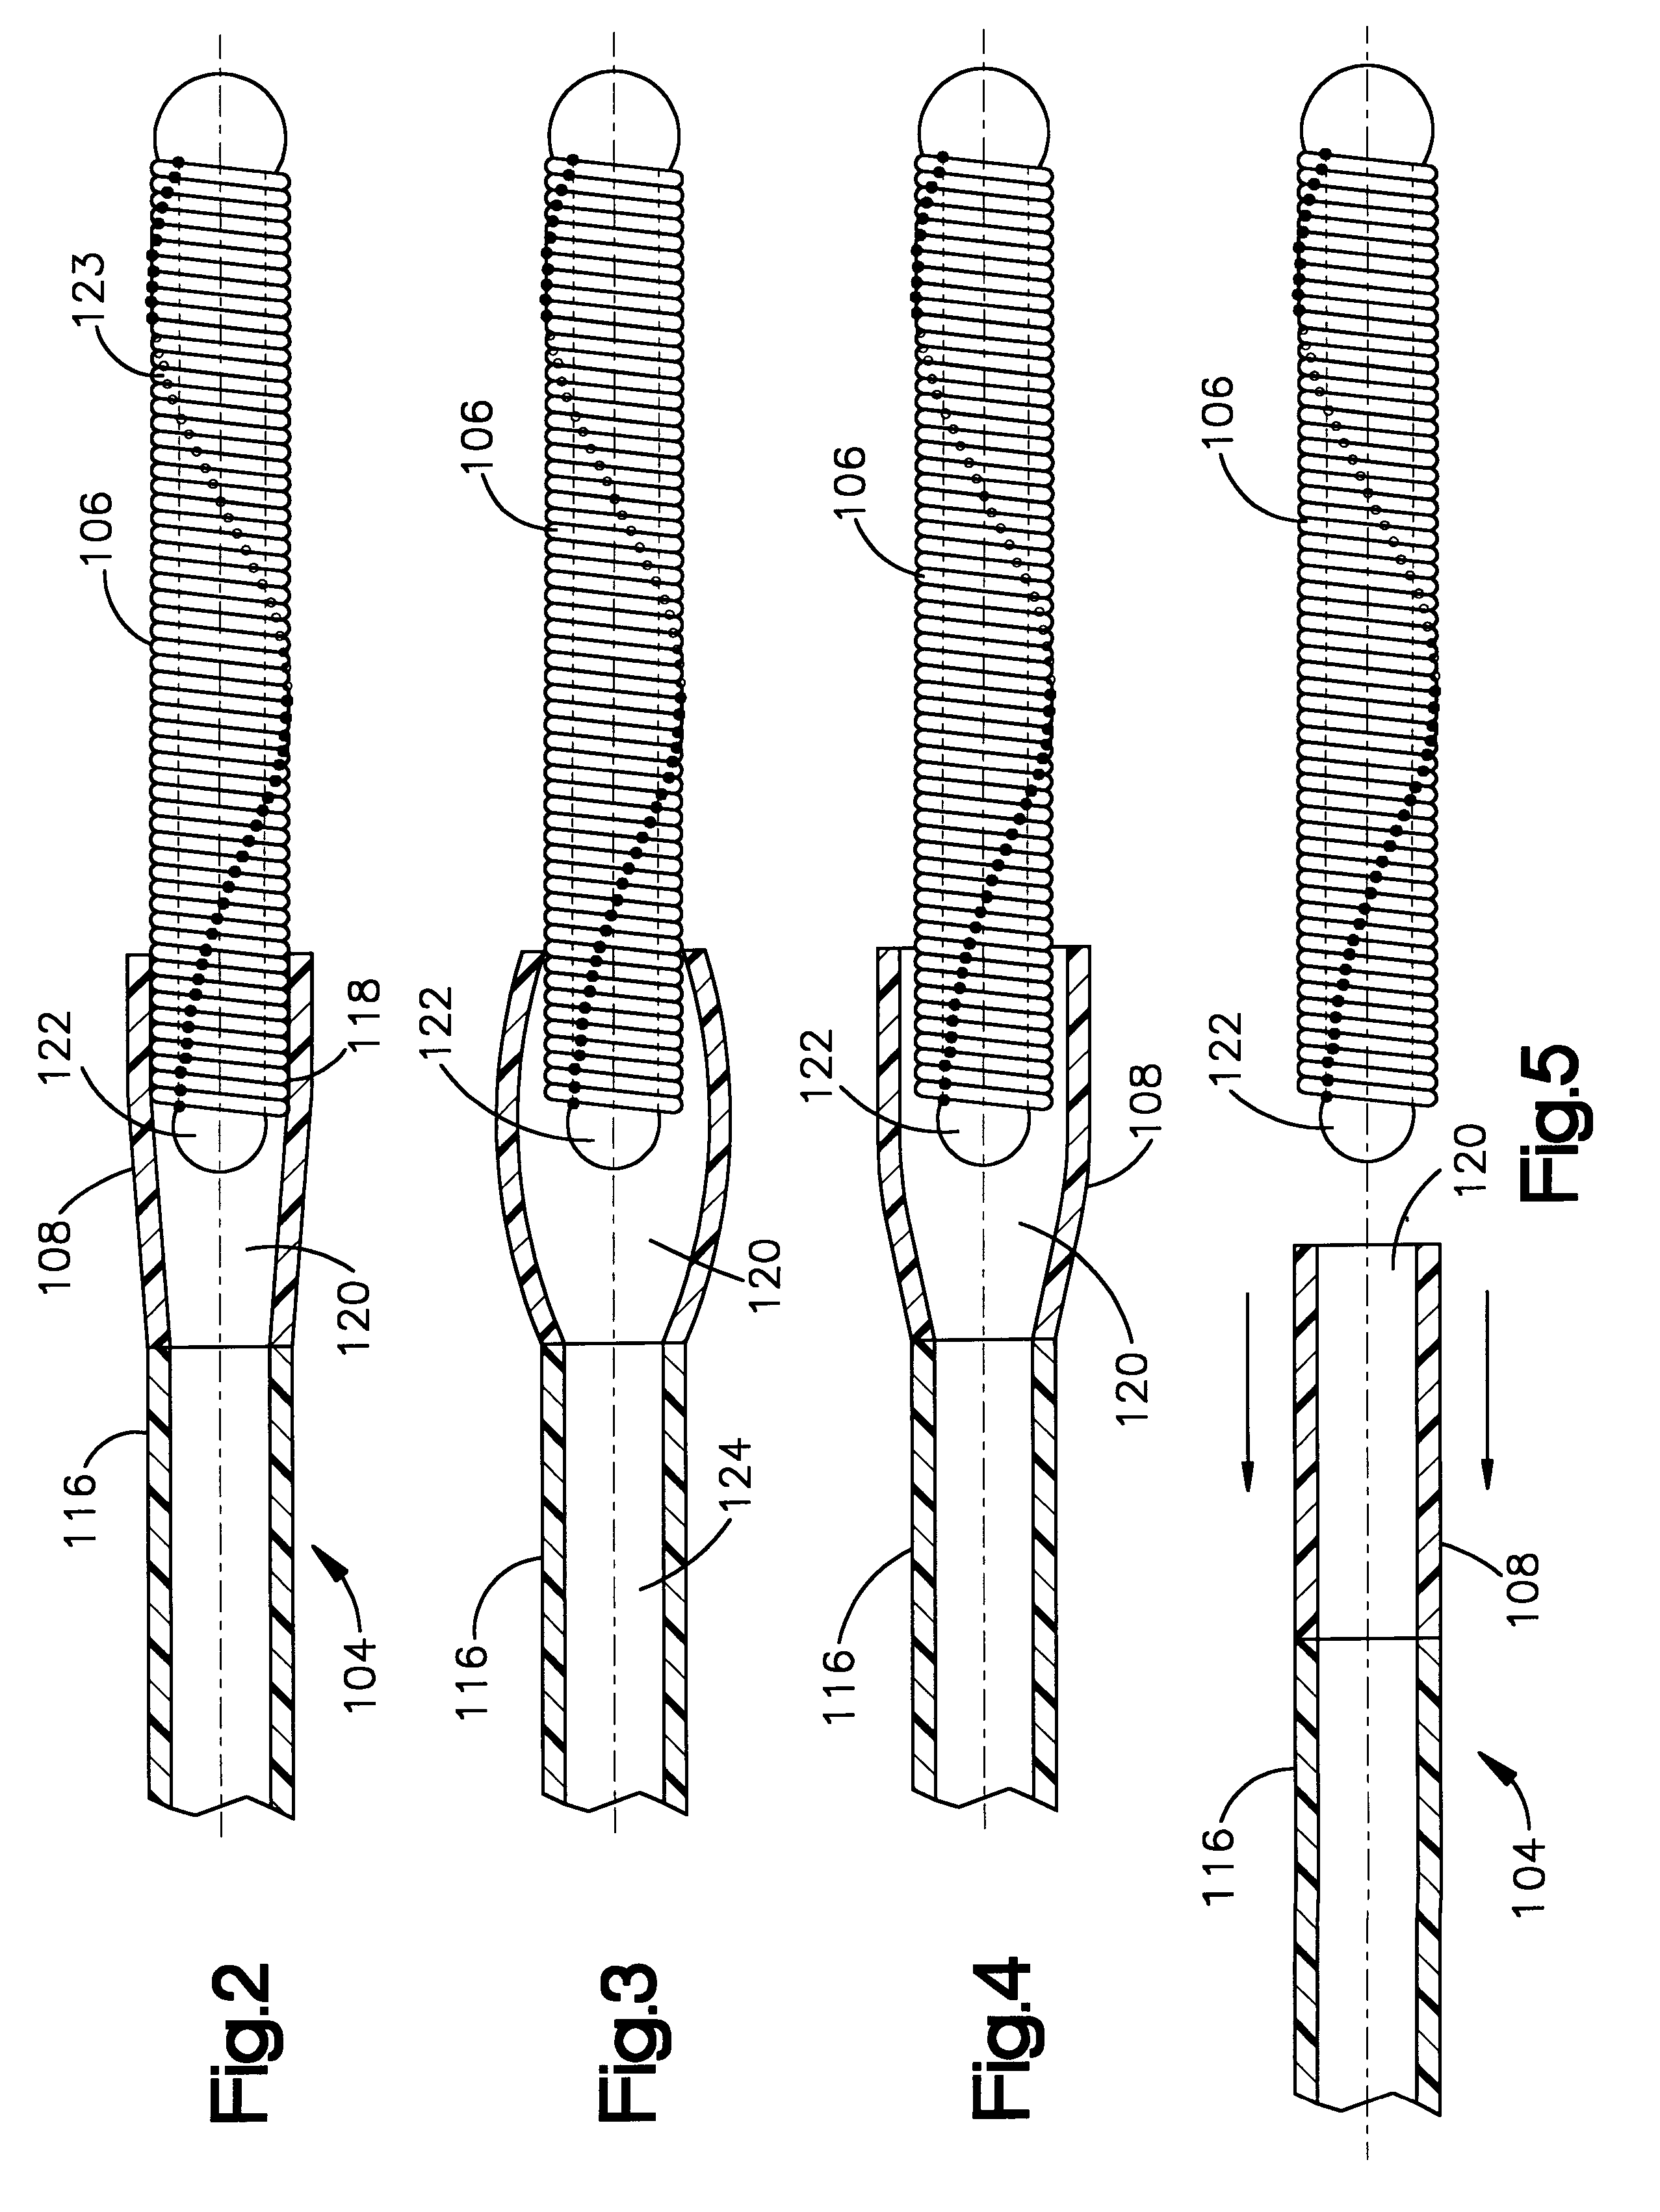 Stretch resistant embolic coil with variable stiffness